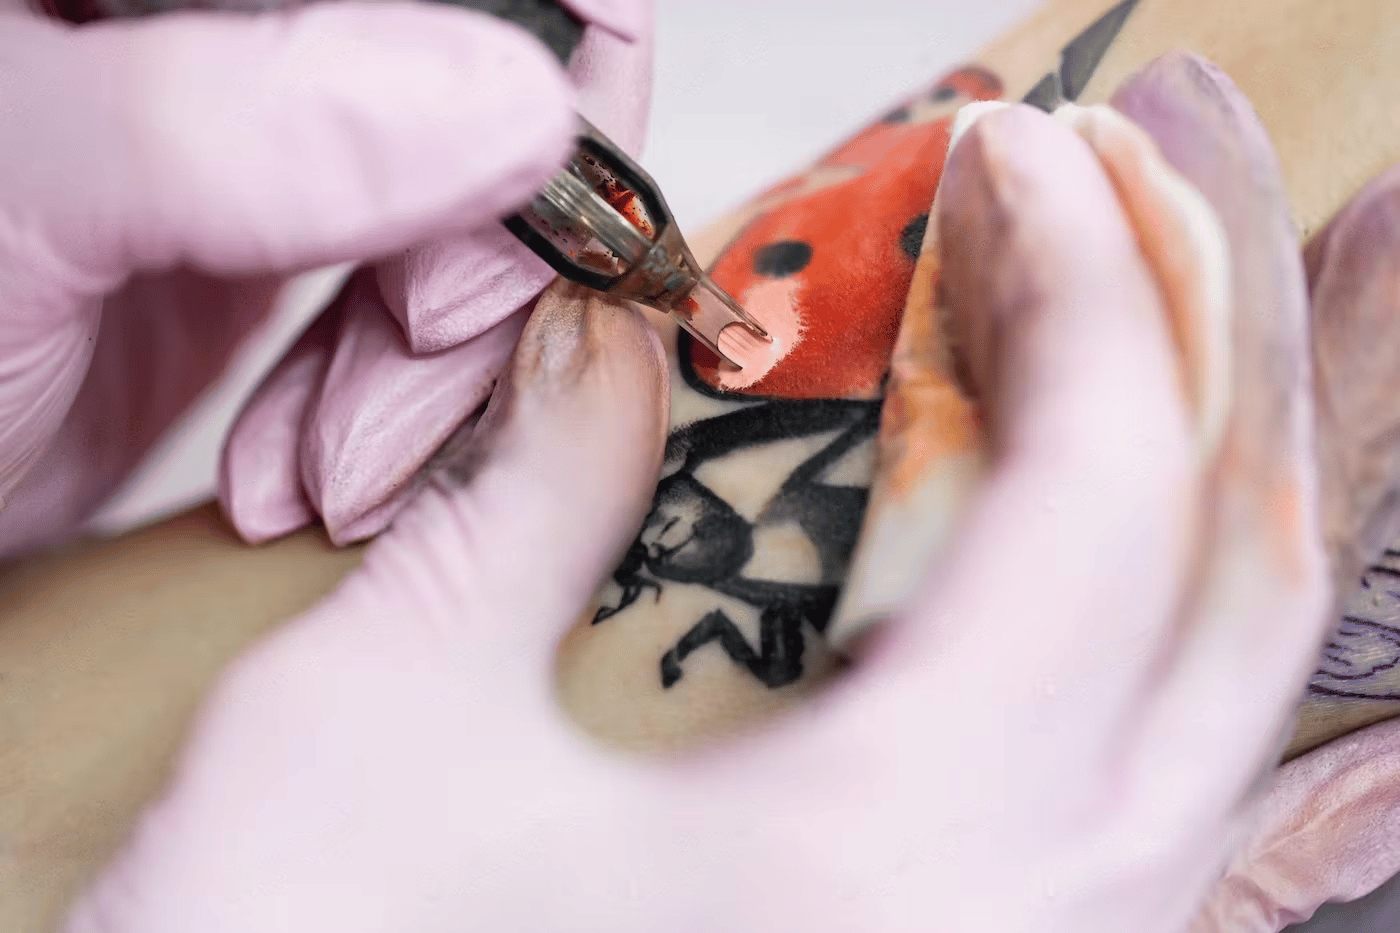 Treating an itchy tattoo